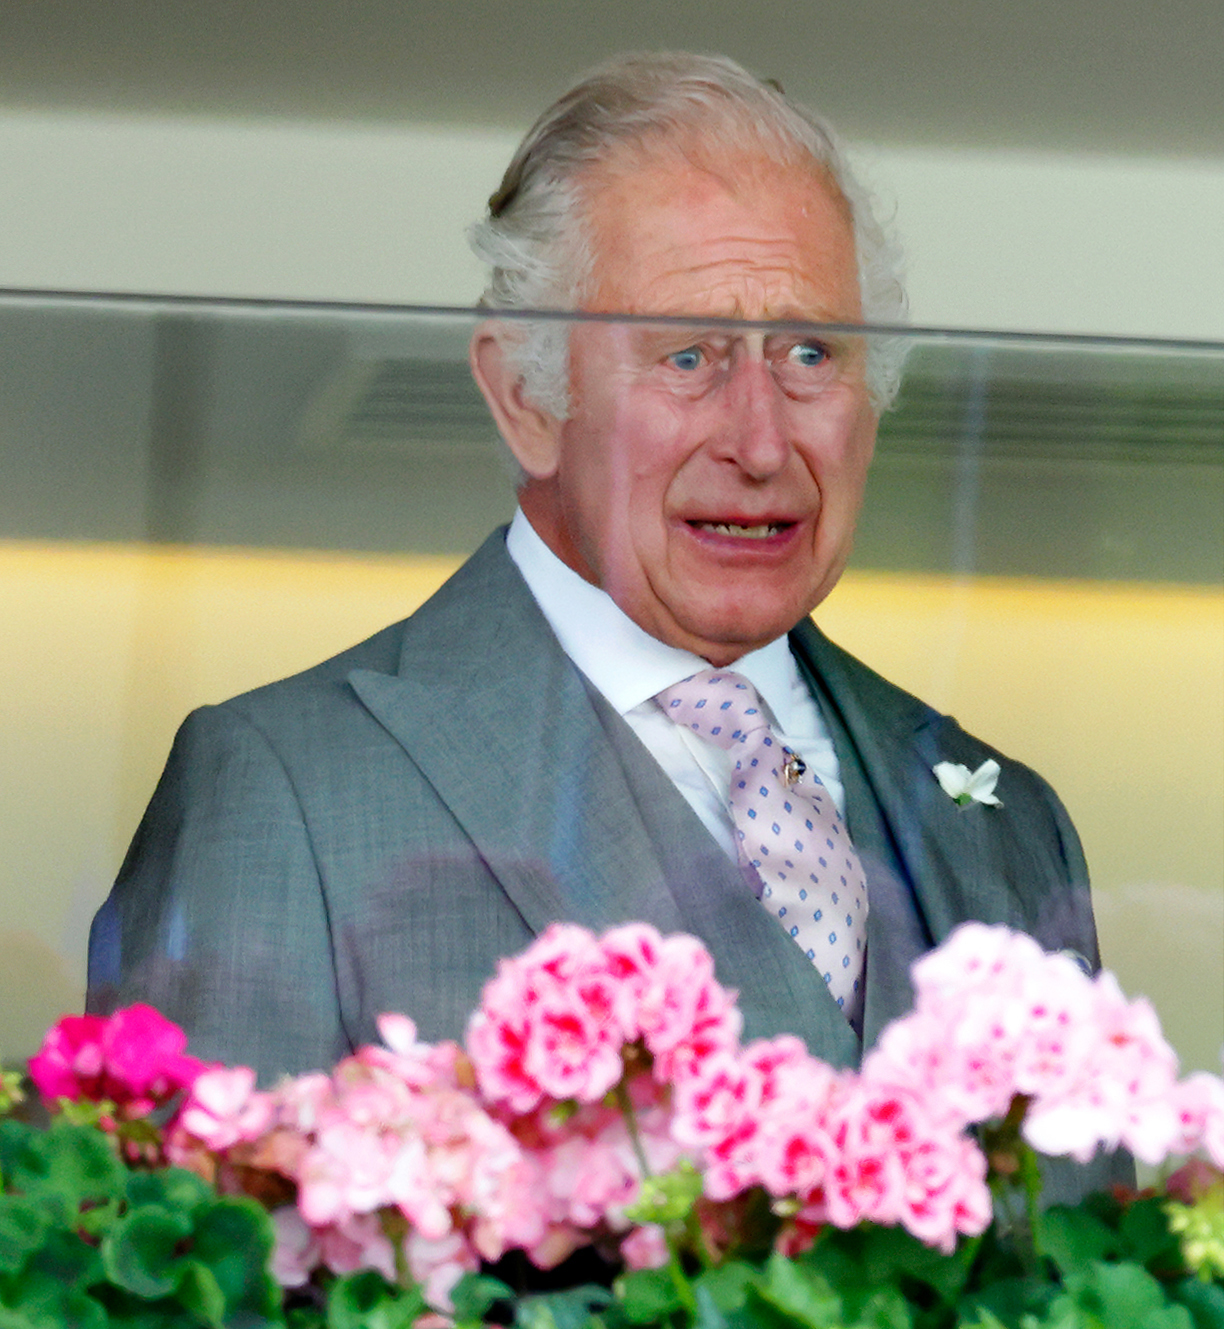 King Charles III watches from the Royal Box at Ascot Racecourse on June 22, 2023 in Ascot, England | Source: Getty Images